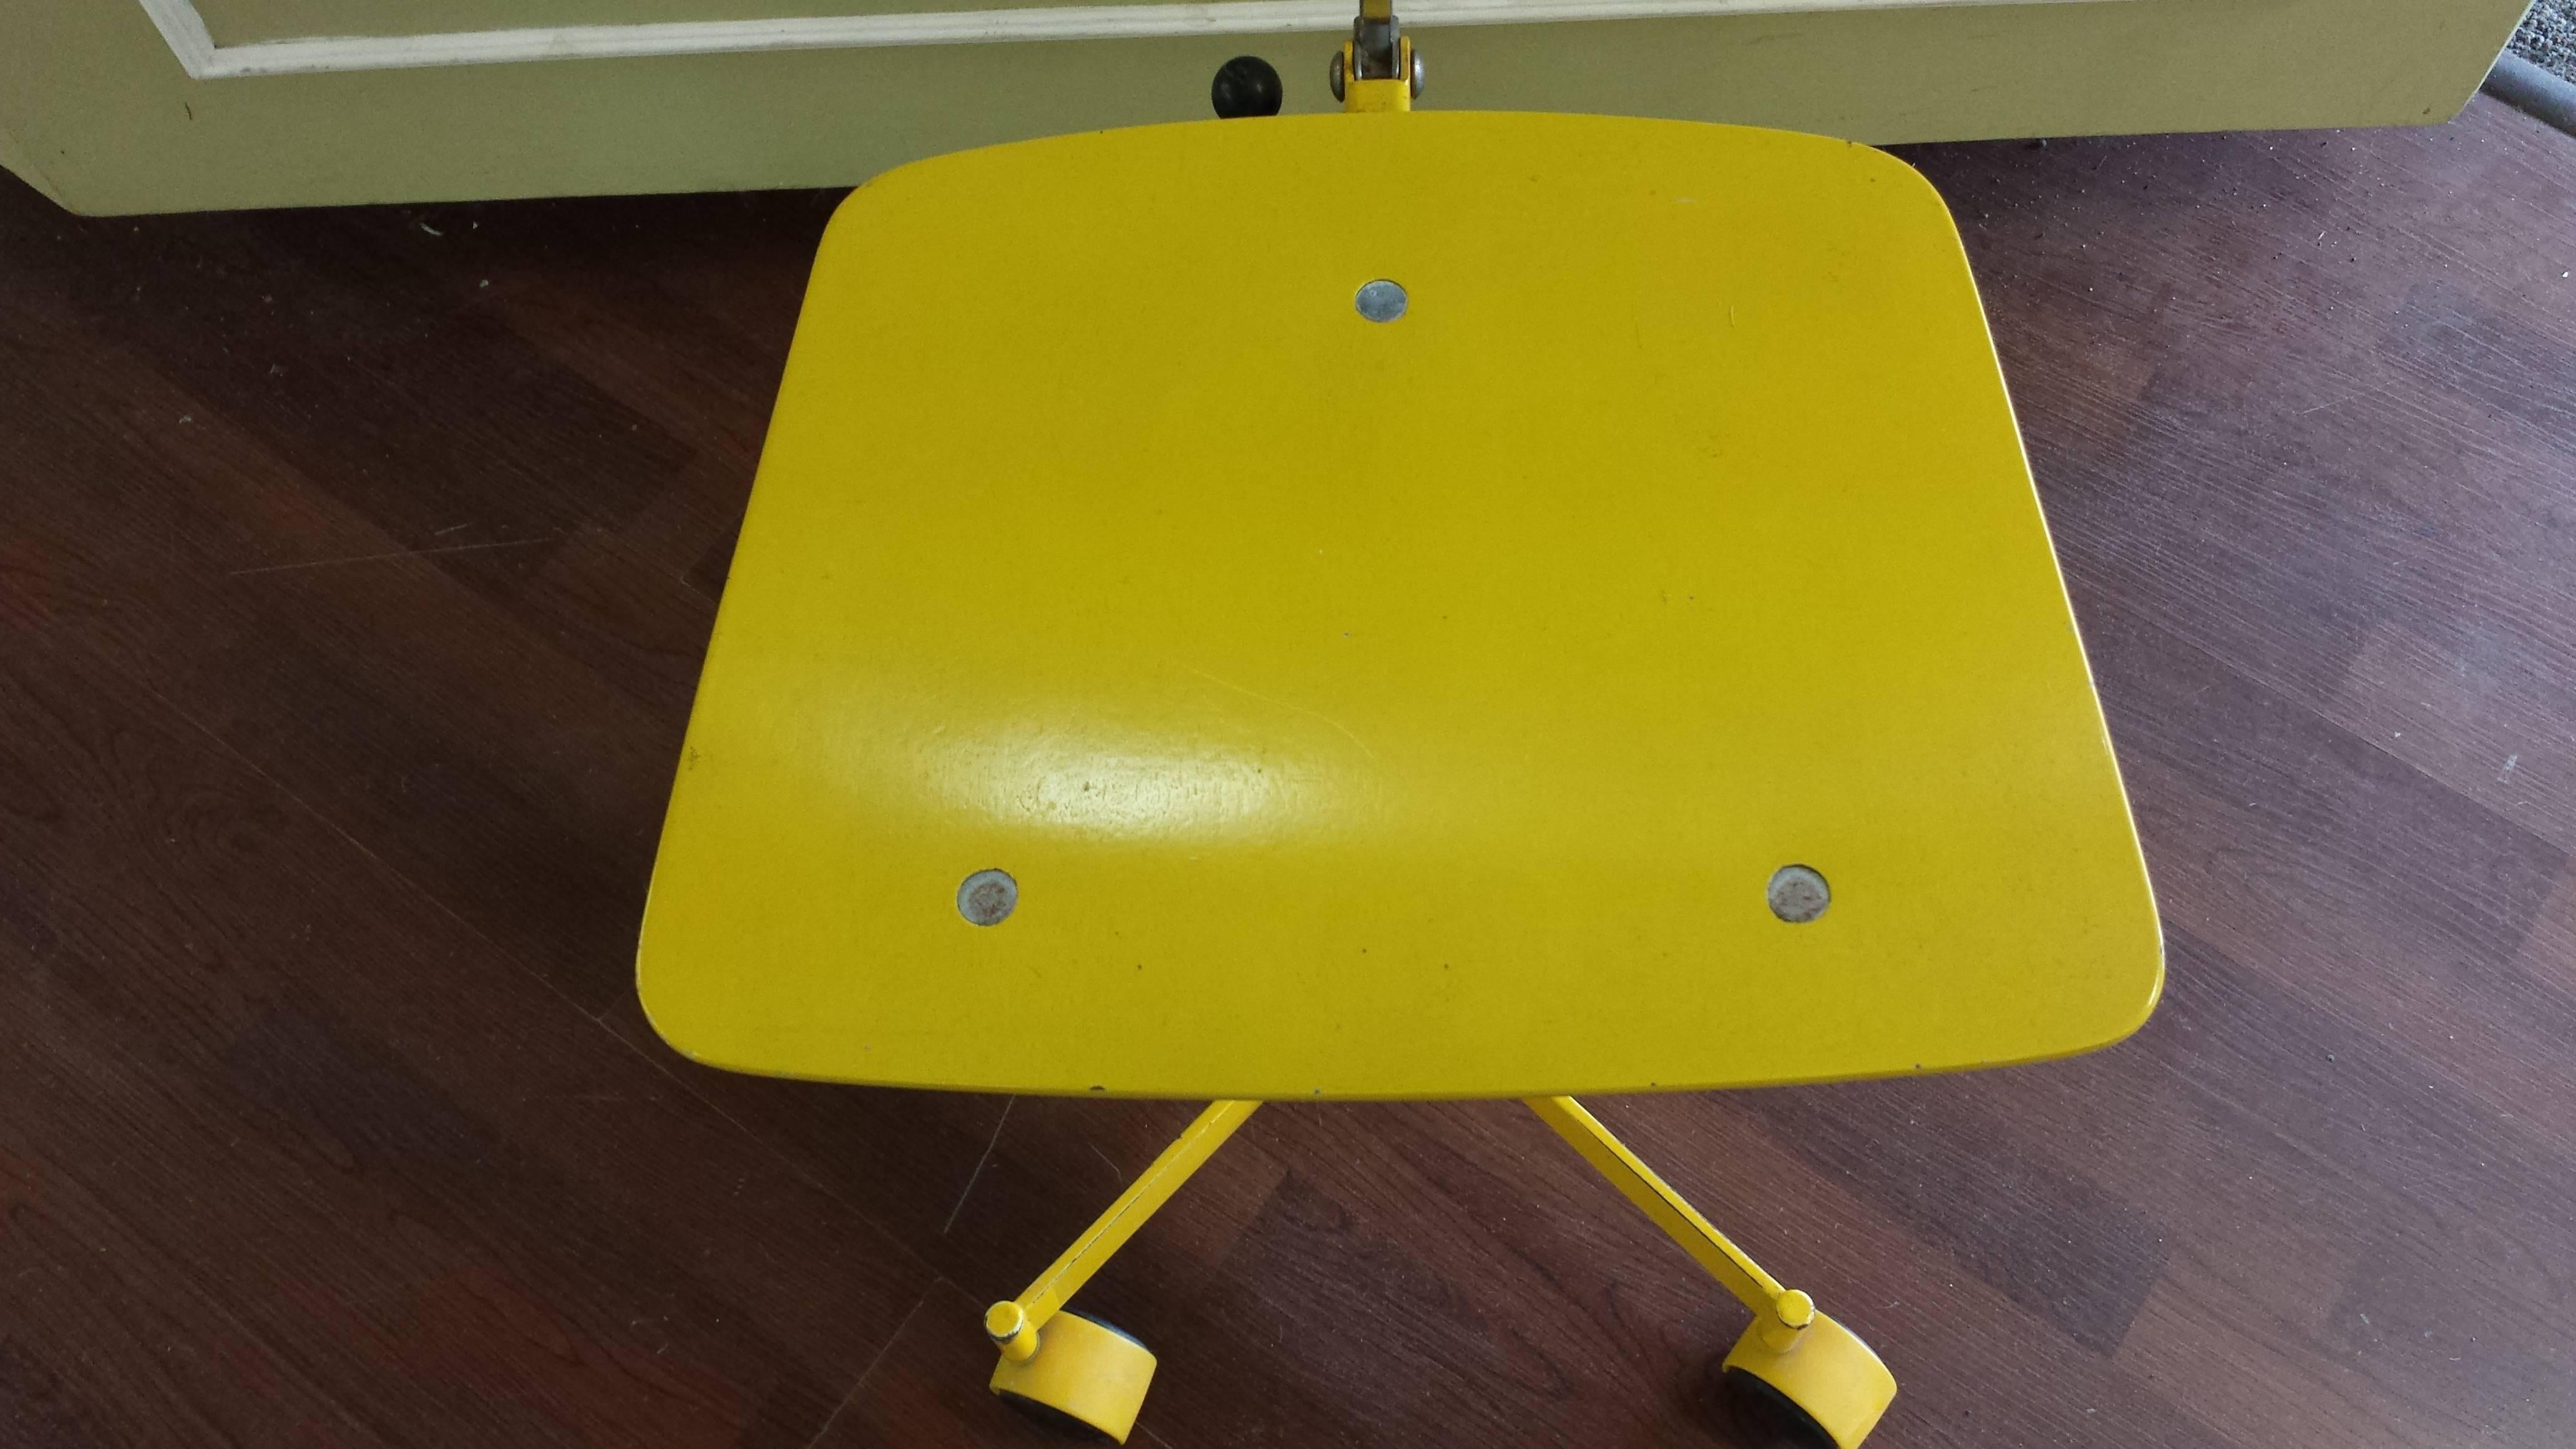 Brilliant yellow Kevi armless fully adjustable desk chair, original label, adjustable seat height, tilting back and adjustable arch back support. The chair is on yellow double wheel casters, original yellow paint but showing signs of wear and slight